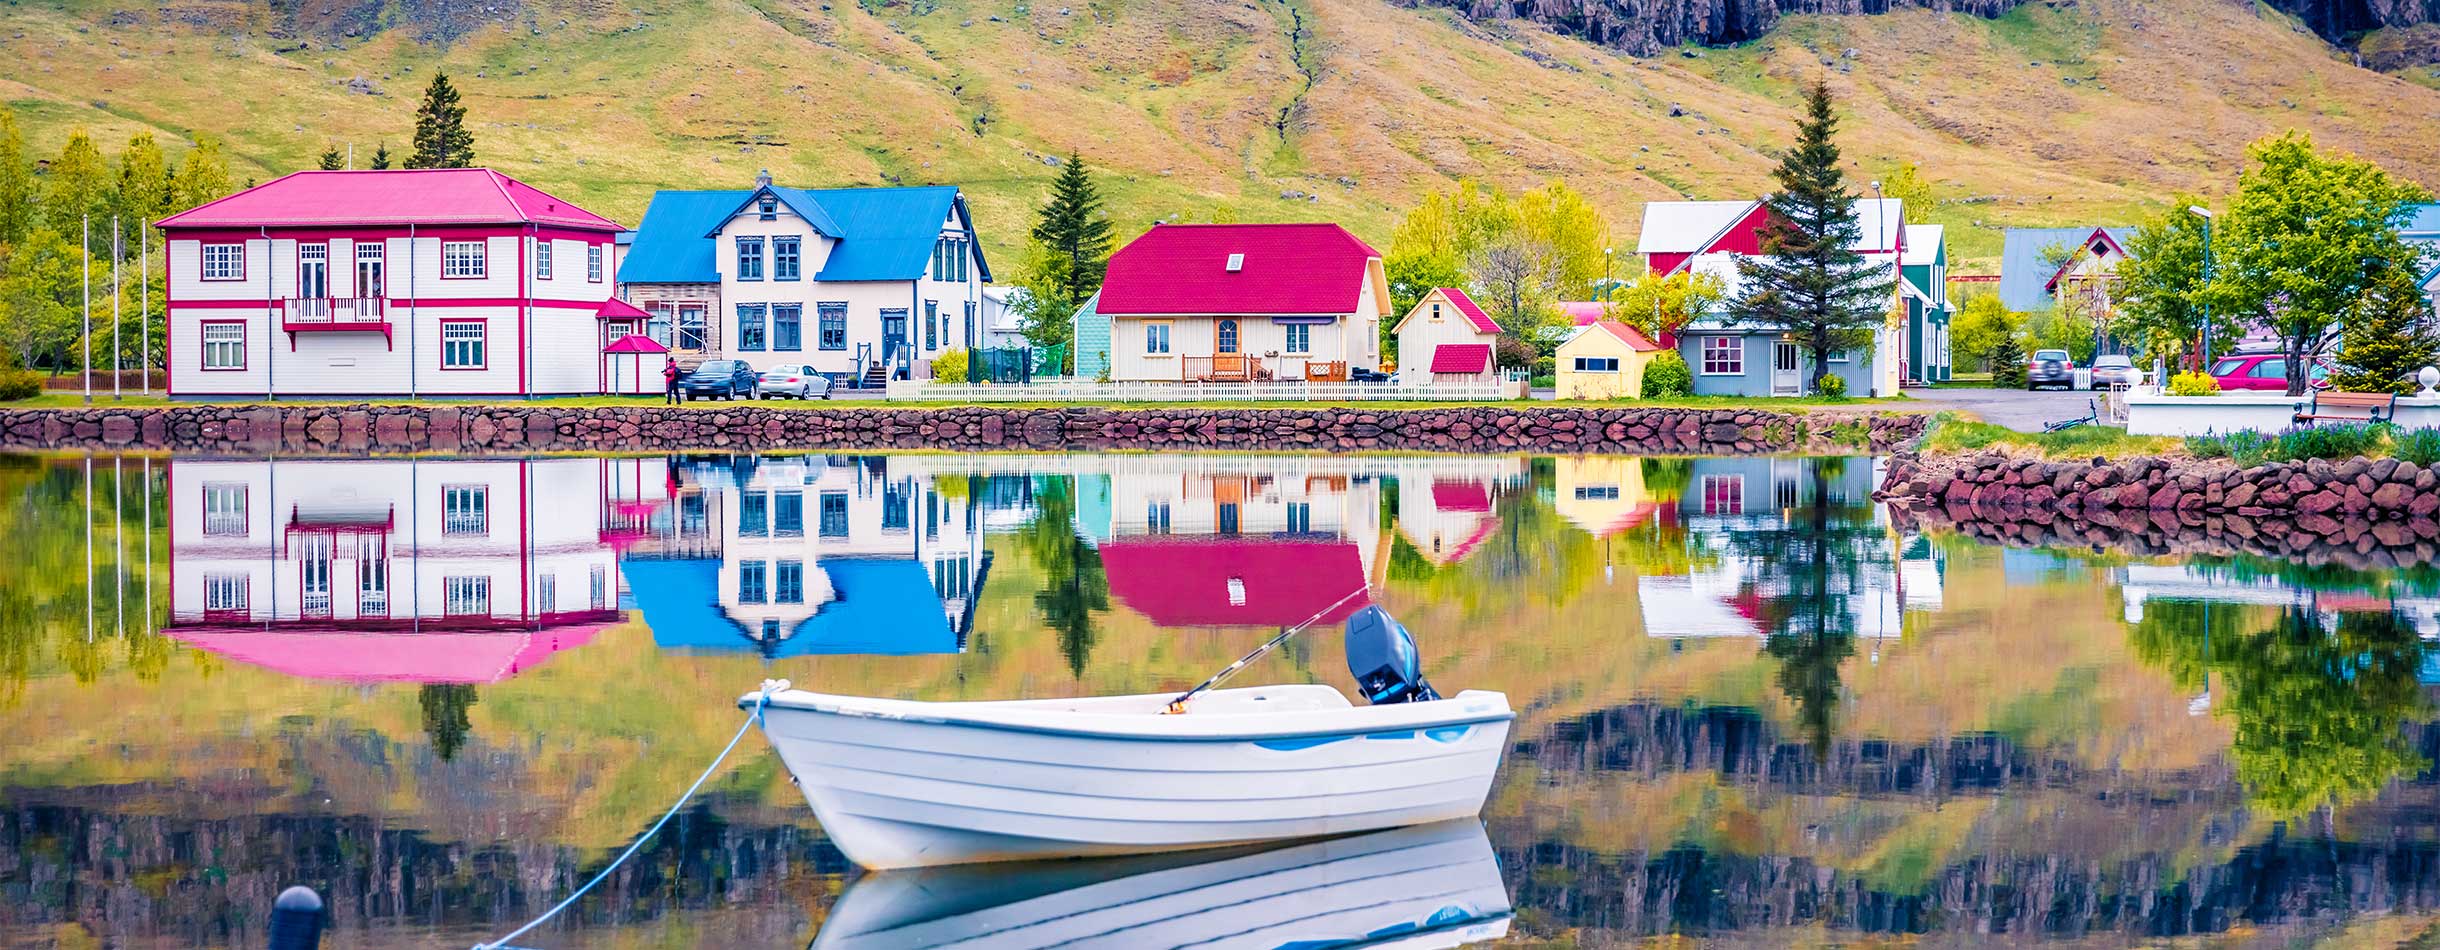 Colorful morning cityscape of small fishing town - Seydisfjordur.